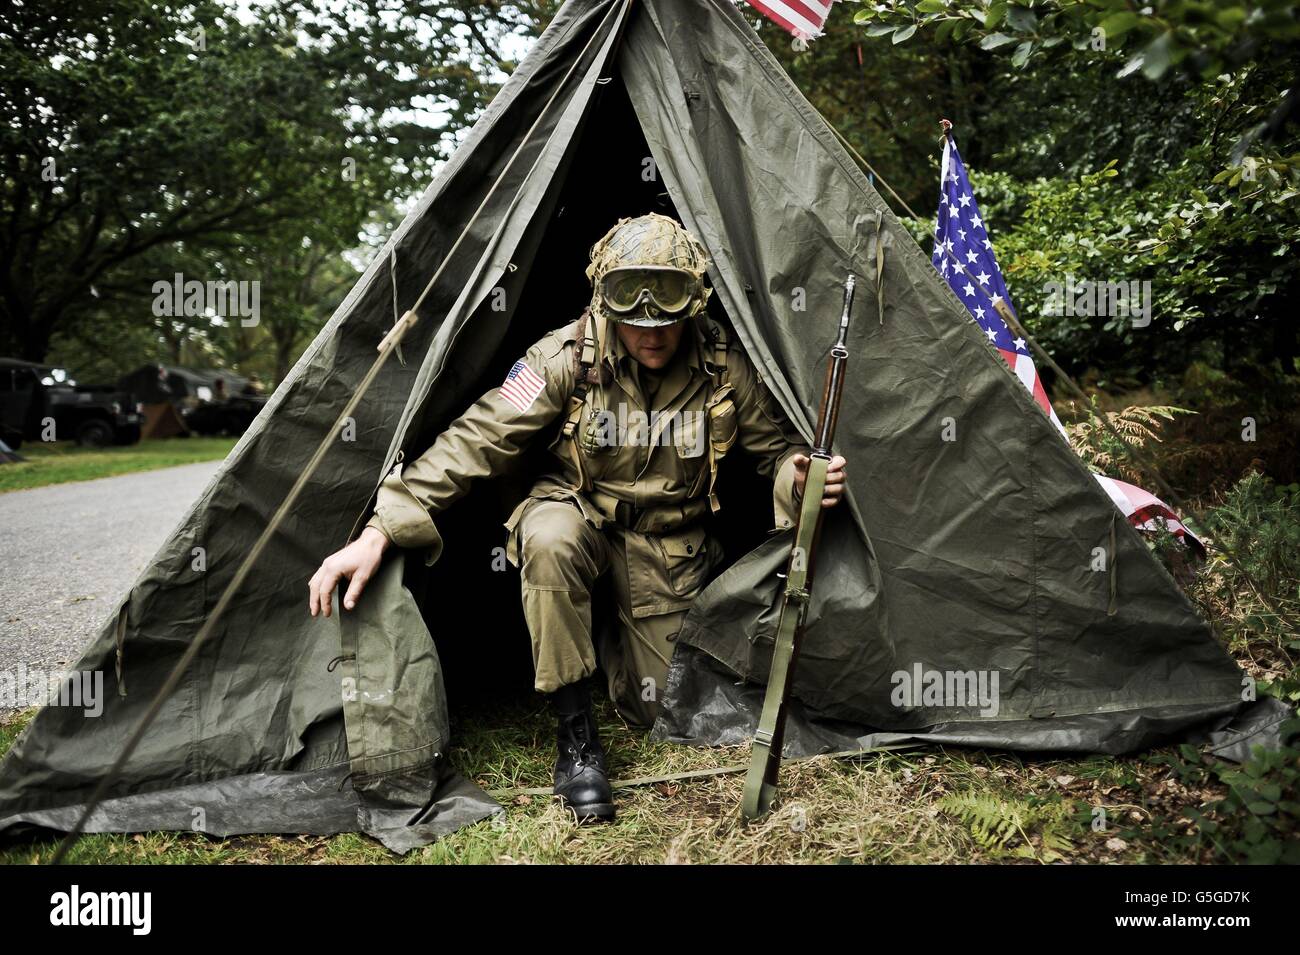 STANDALONE Photo. A man dressed as an American Army 101st Airborne soldier exits his tent clutching his replica M1 Garand rifle at the WWII Weekend at Castle Drogo in Devon. Stock Photo